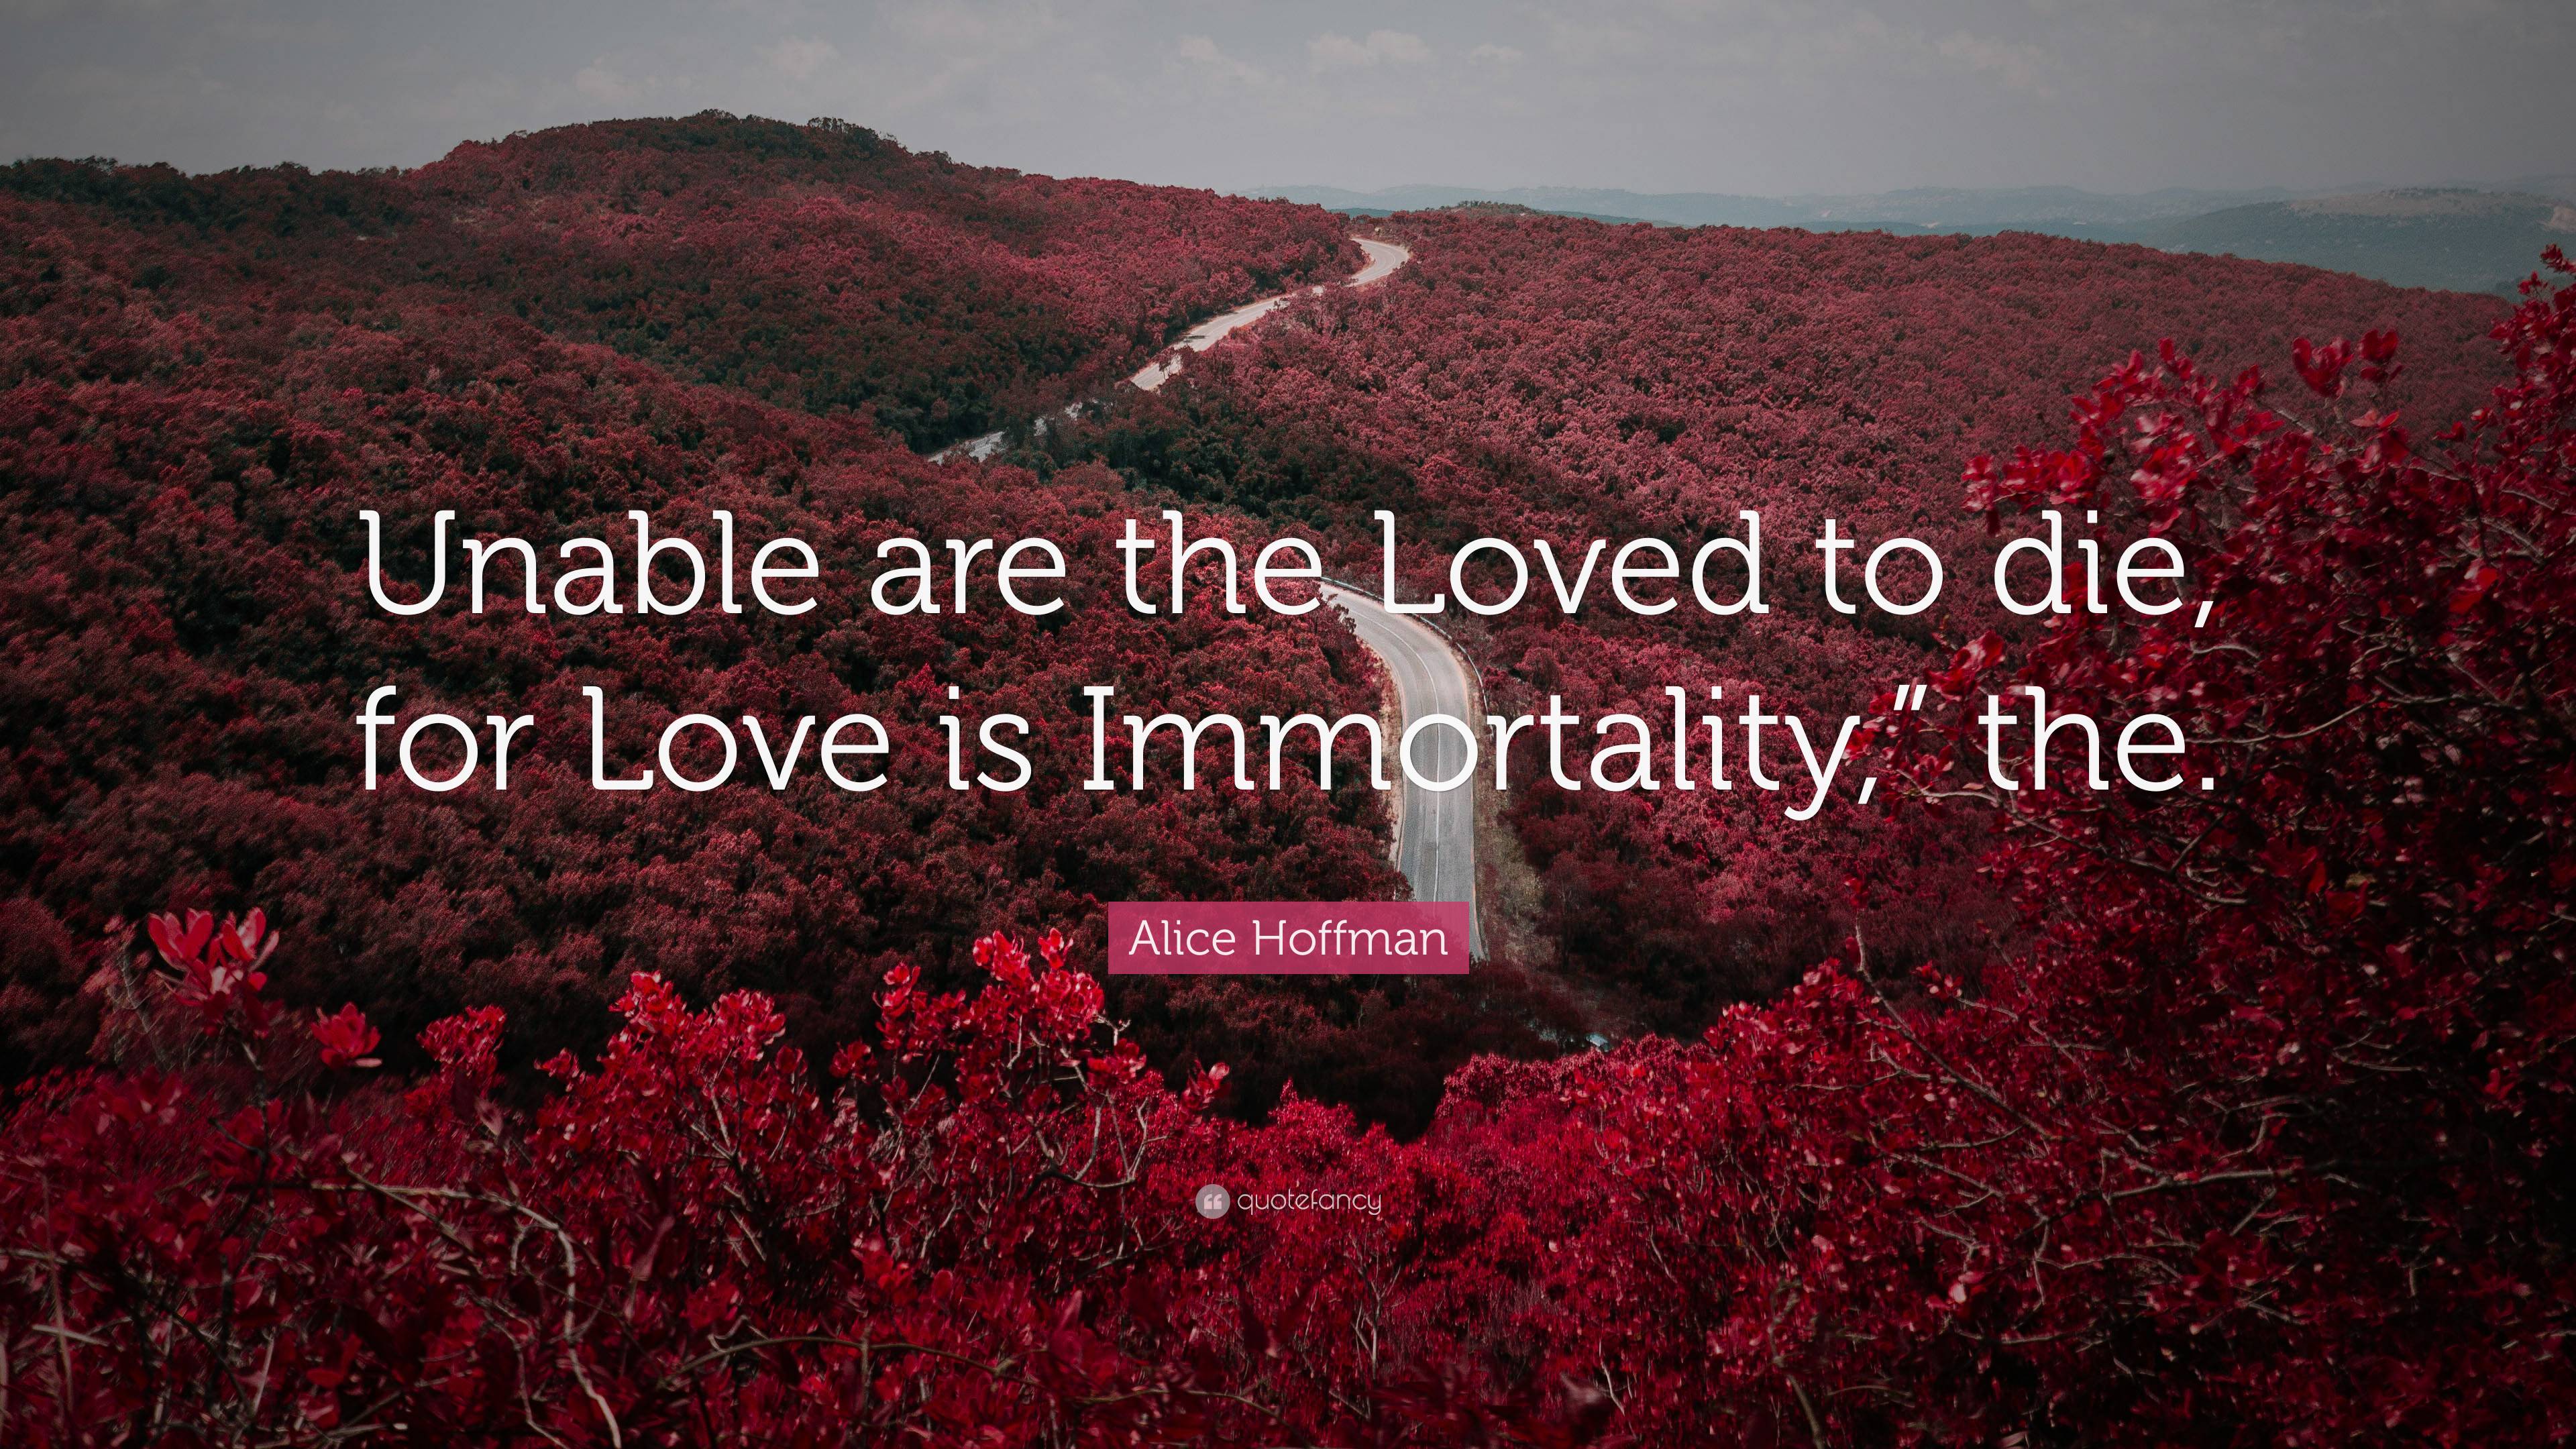 Alice Hoffman Quote: “Unable are the Loved to die, for Love is ...